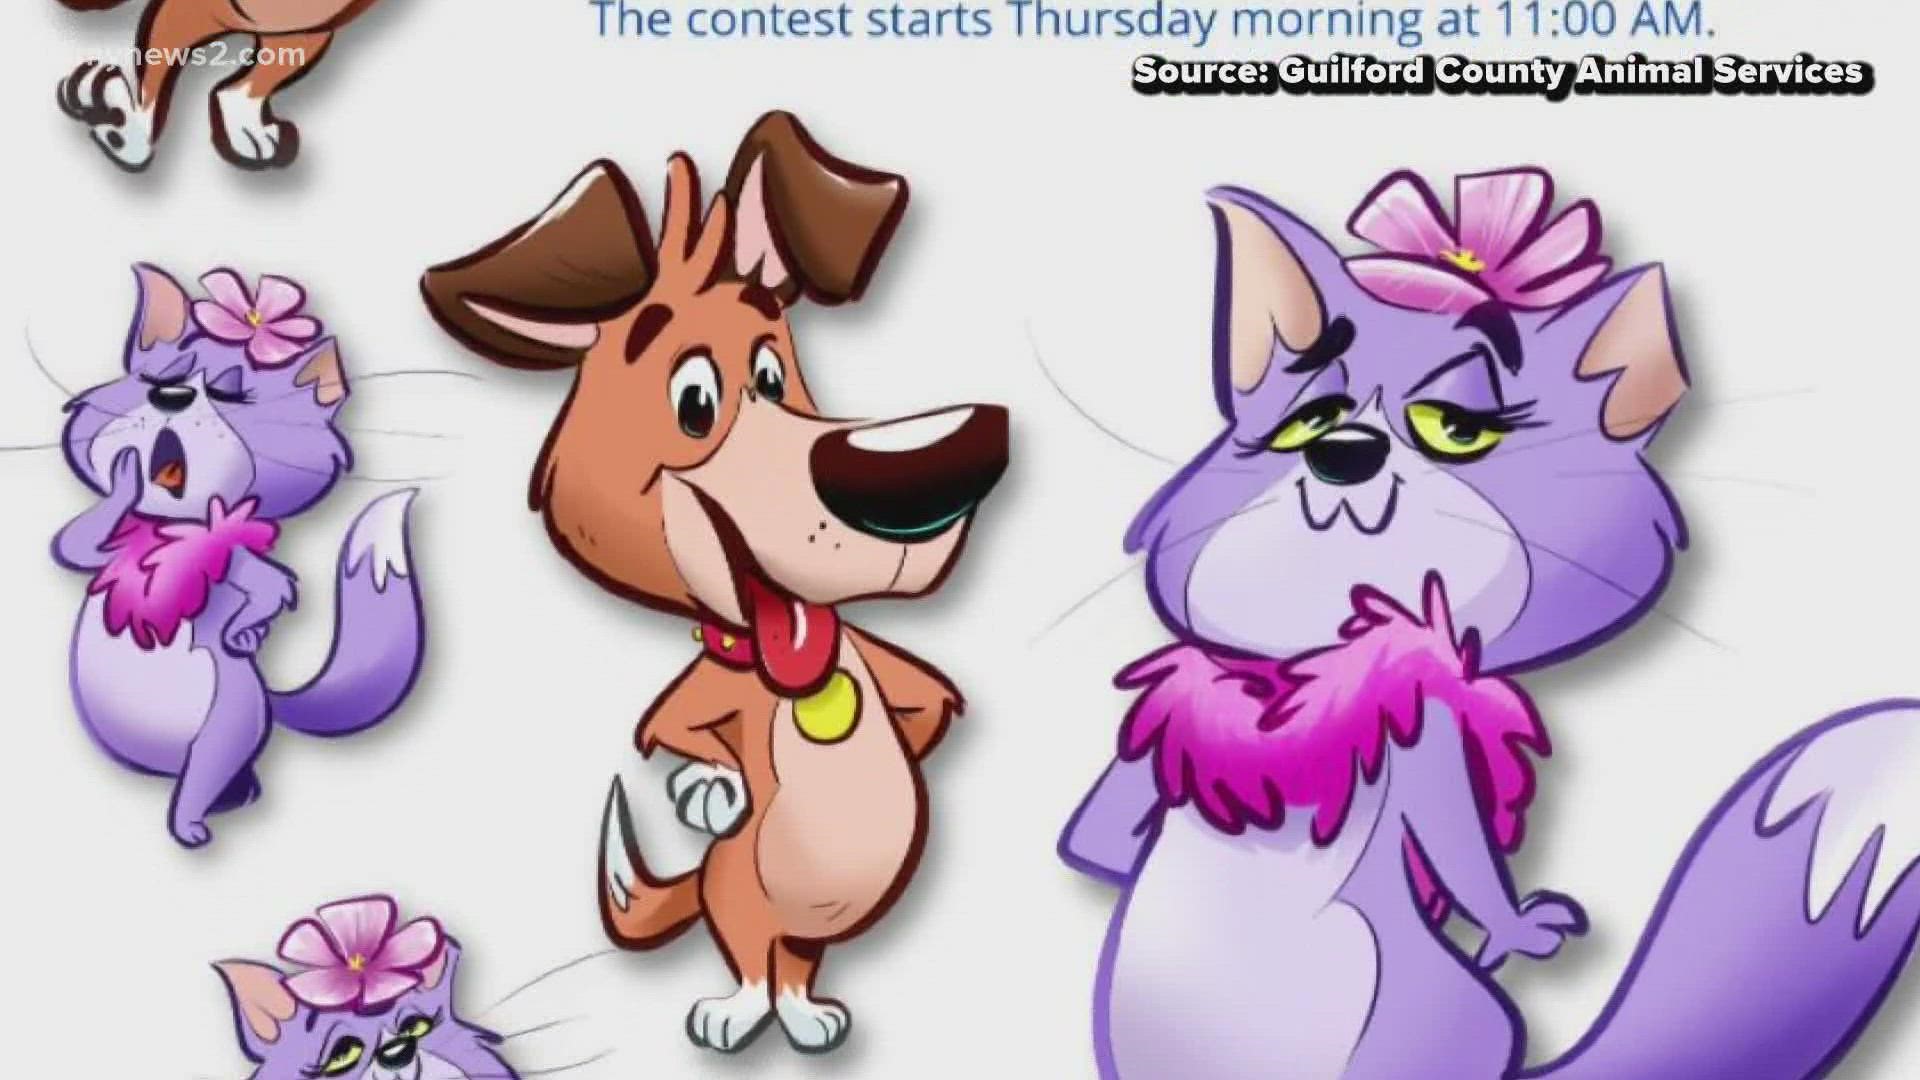 A Disney Animation Studio artist created cartoon mascots for Guilford County Animal Services.